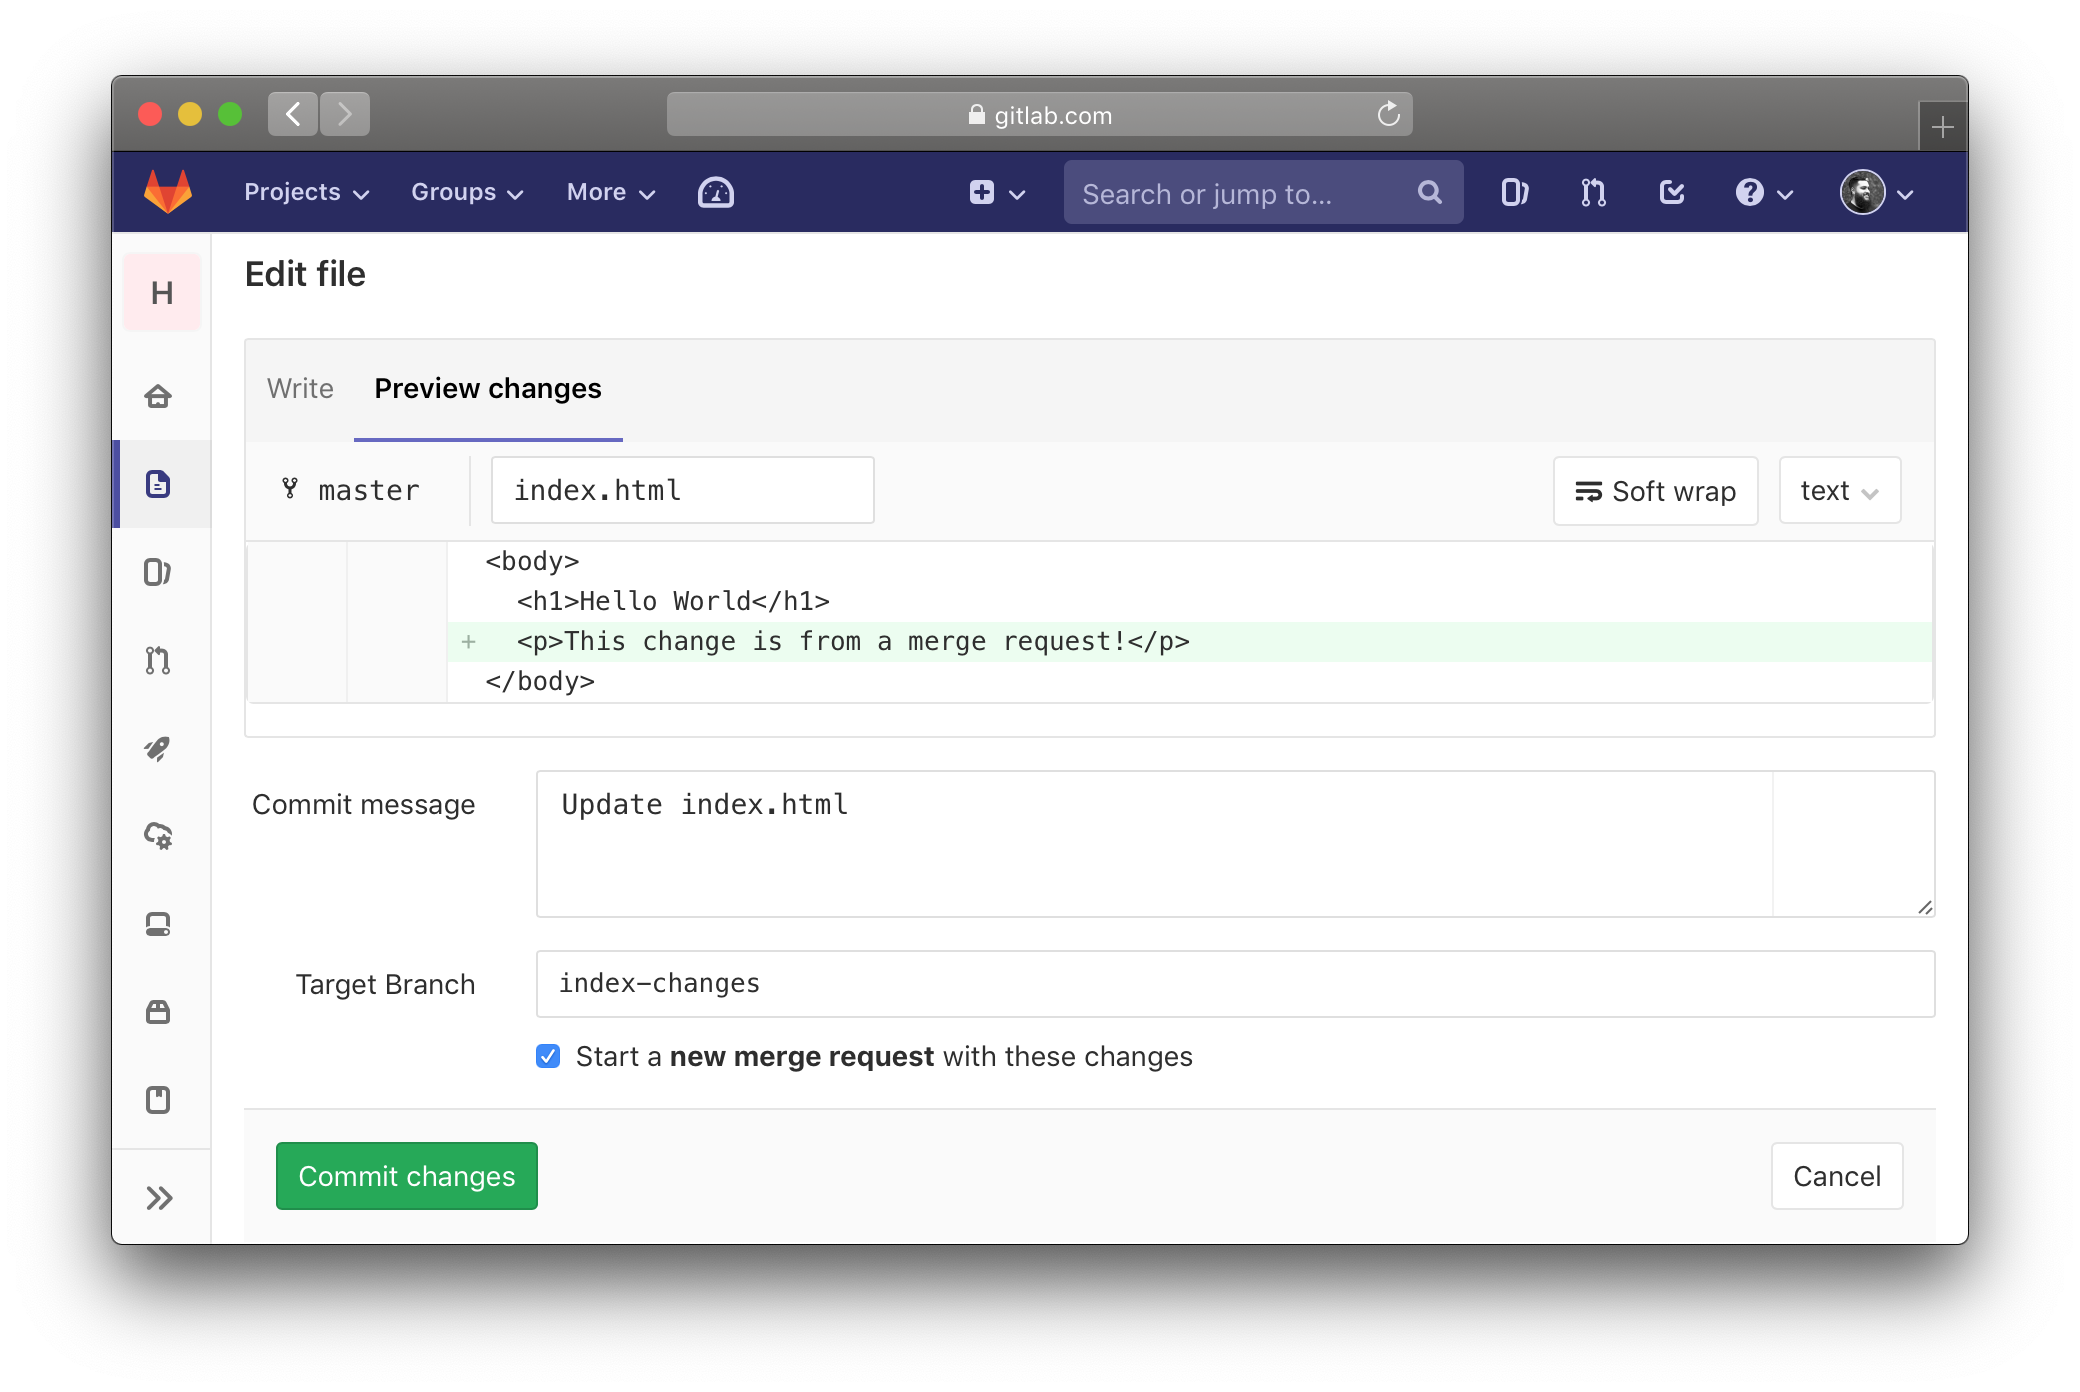 Creating a merge request from GitLab's UI.